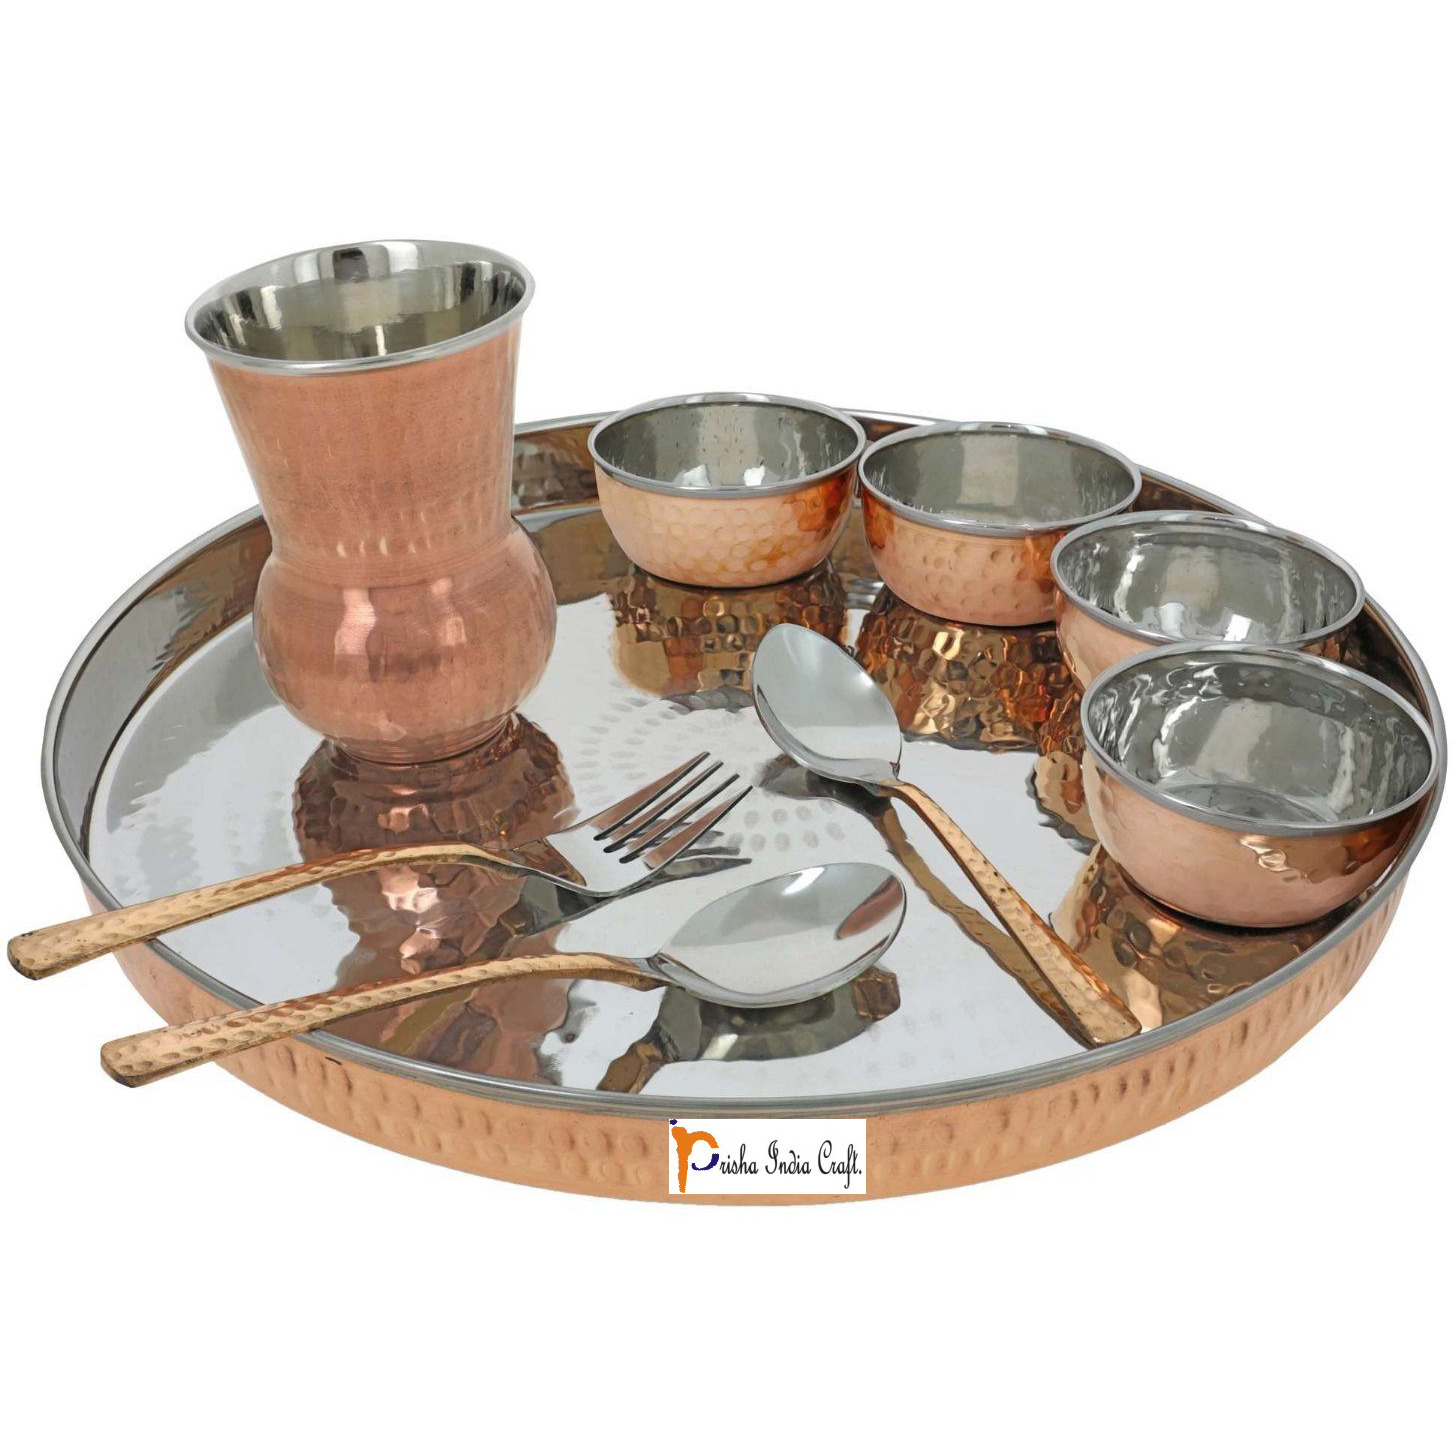 Prisha India Craft B. Set of 6 Dinnerware Traditional Stainless Steel Copper Dinner Set of Thali Plate, Bowls, Glass and Spoons, Dia 13  With 1 Luxury Style Pitcher Jug - Christmas Gift